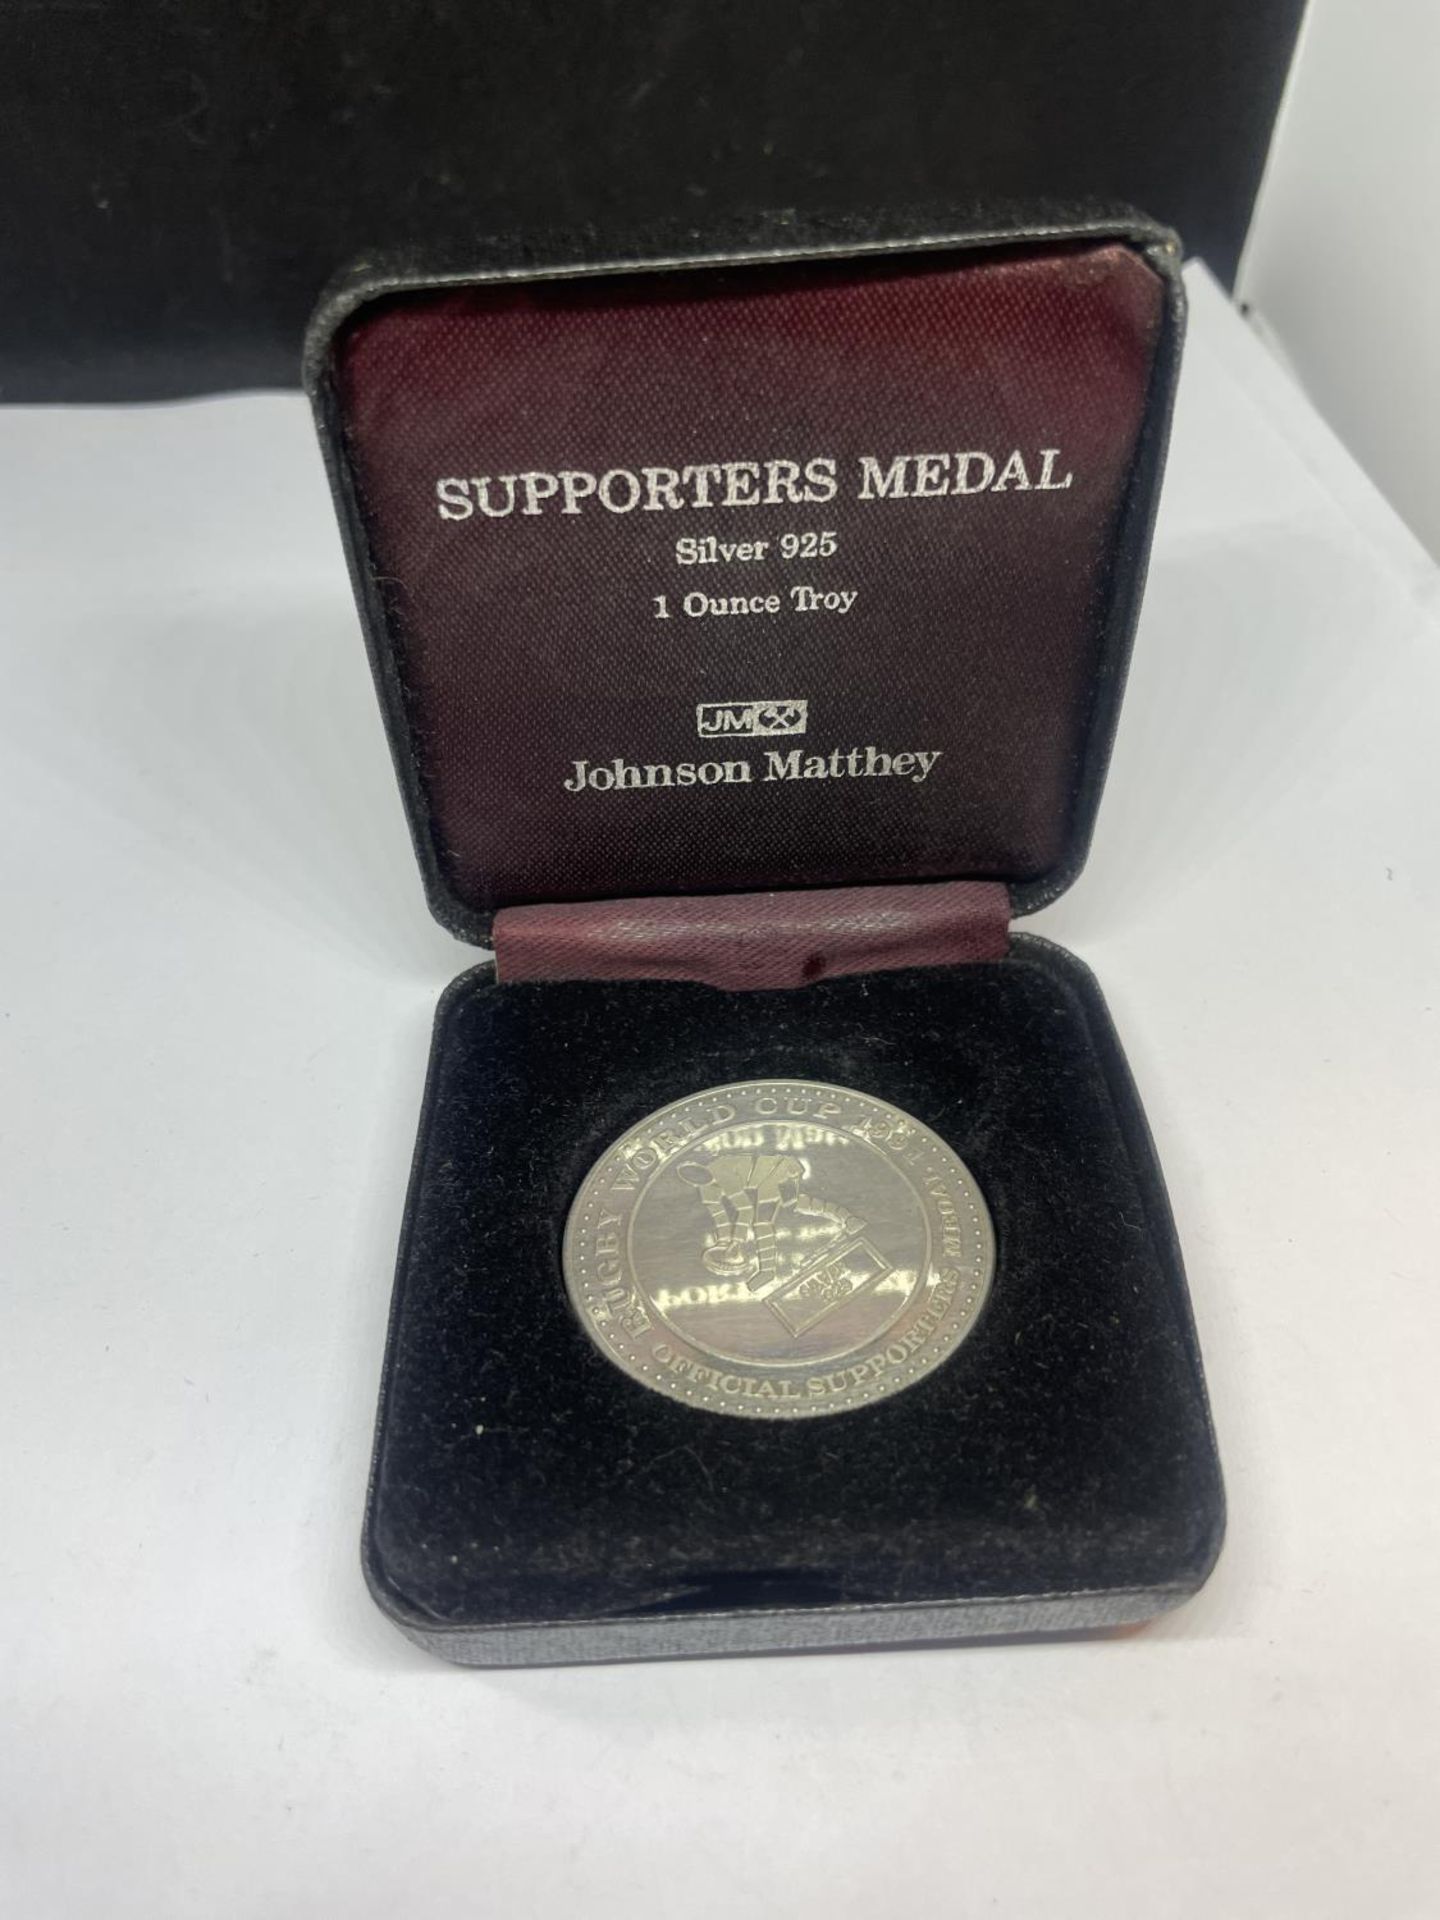 A SILVER 1991 RUGBY WORLD CUP MEDAL IN A PRESENTATION BOX